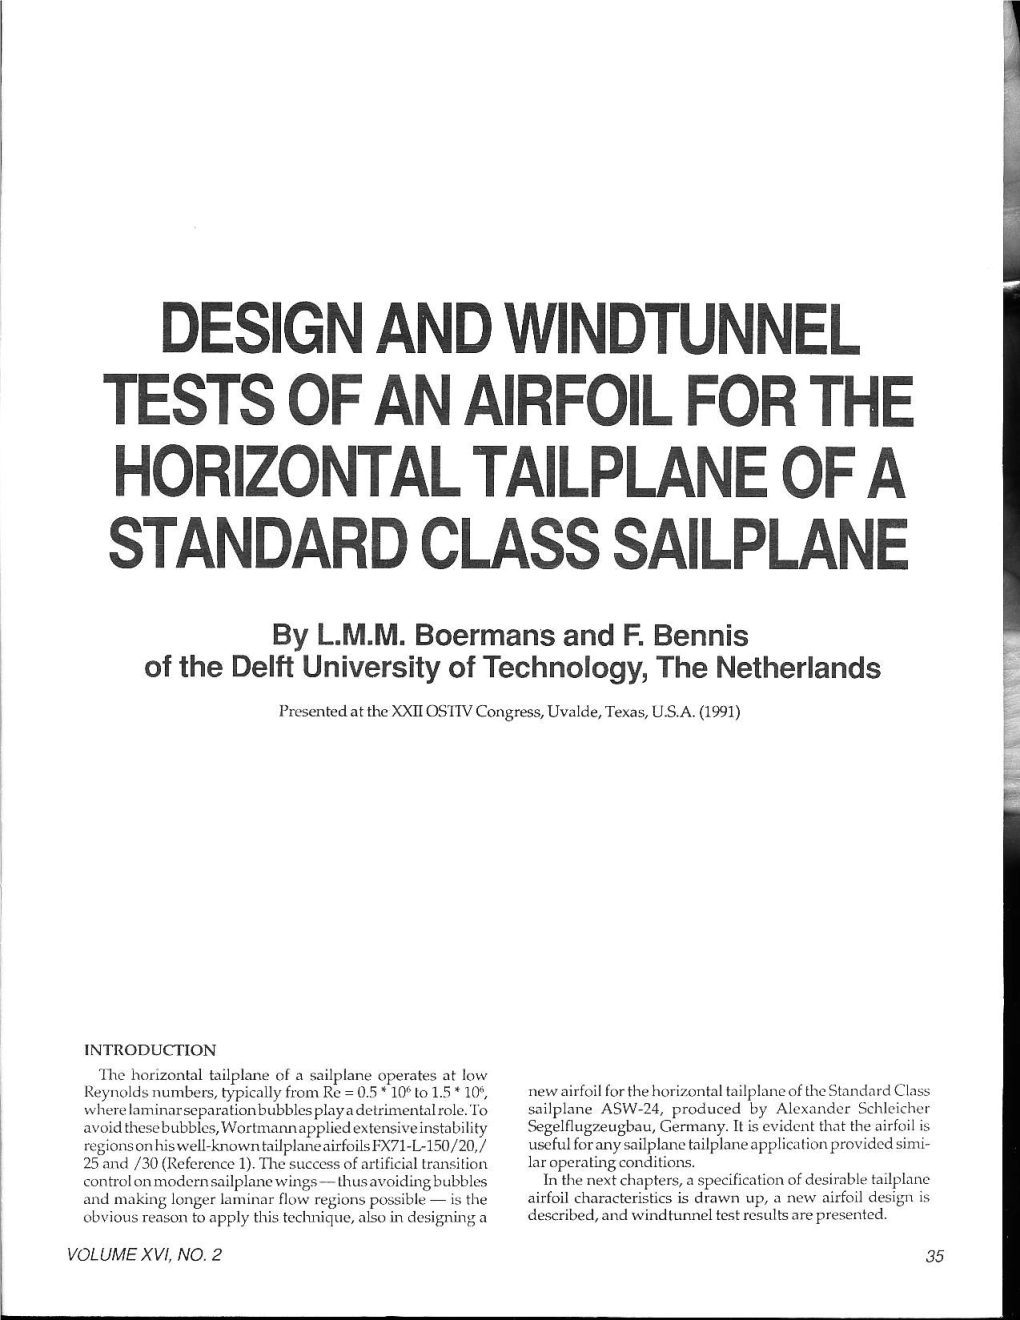 Design and Windtunnel Tests of an Airfoil for the Horizontal Tailplane of a Standard Class Sailplane